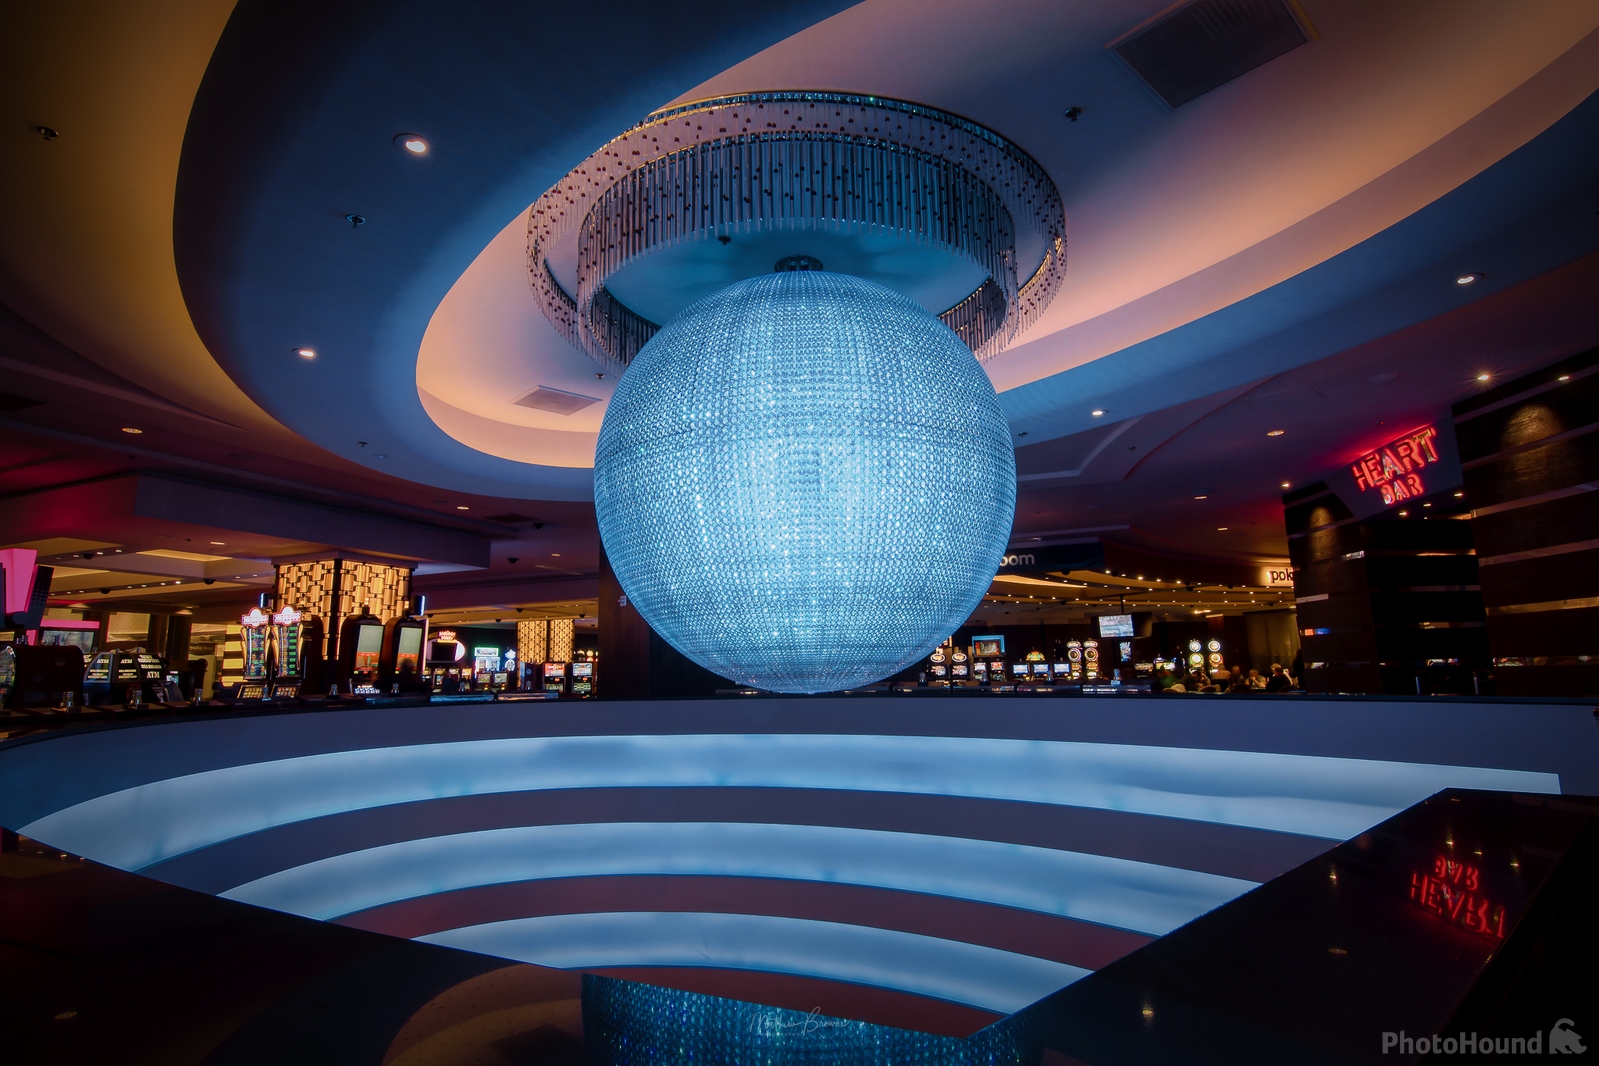 Image of Planet Hollywood Casino by Mathew Browne